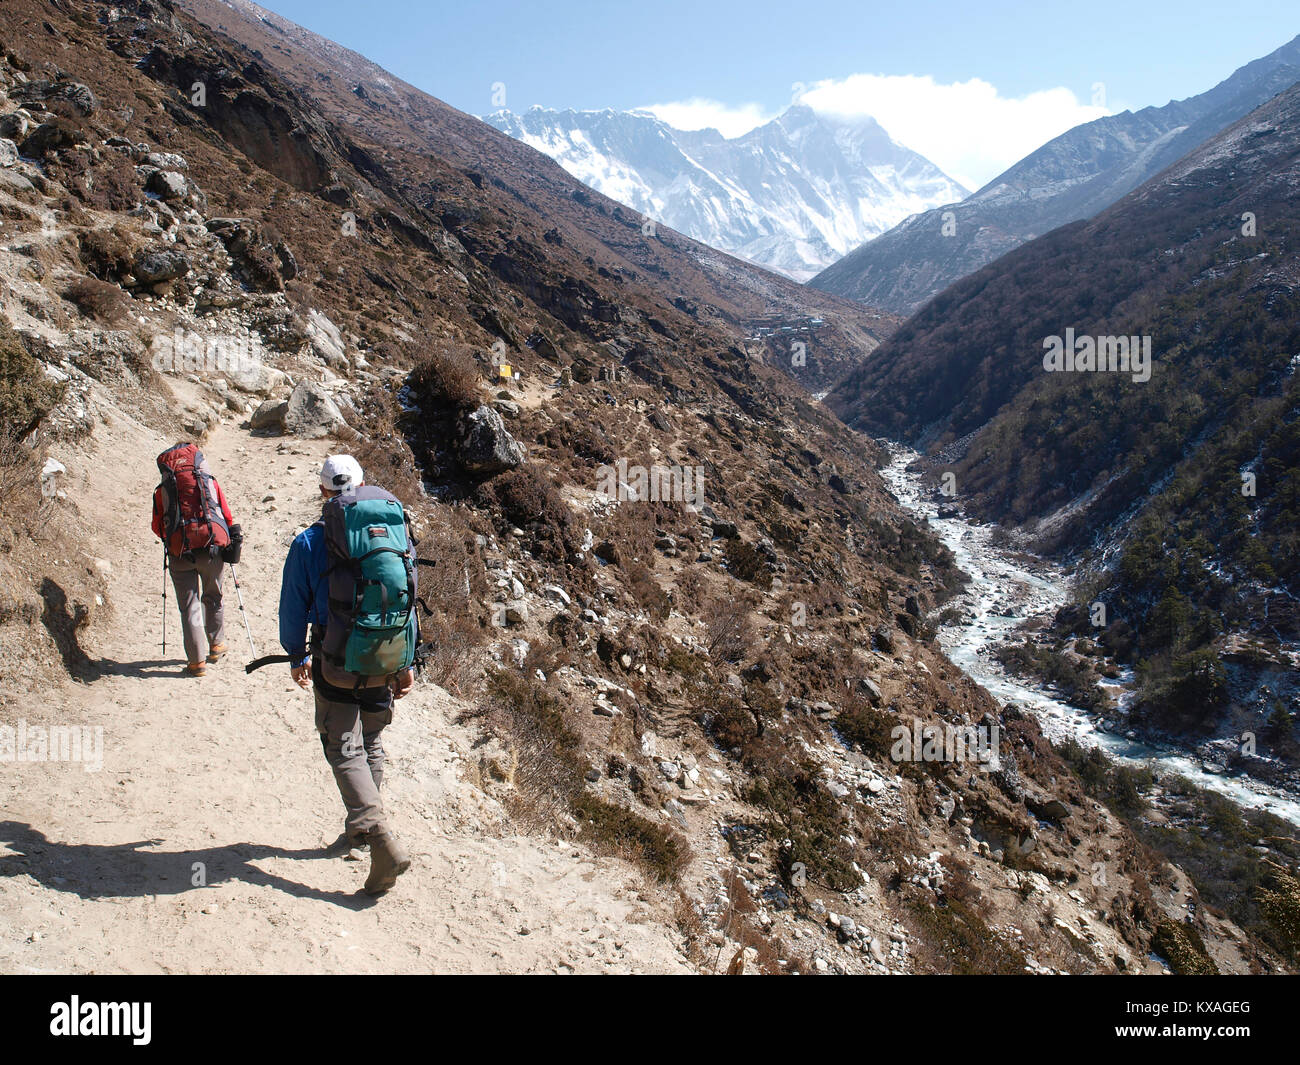 Two hikers on trail of Khumbu valley, just after Namche Bazar, with summit of Mount Everest in background, Nepal Stock Photo